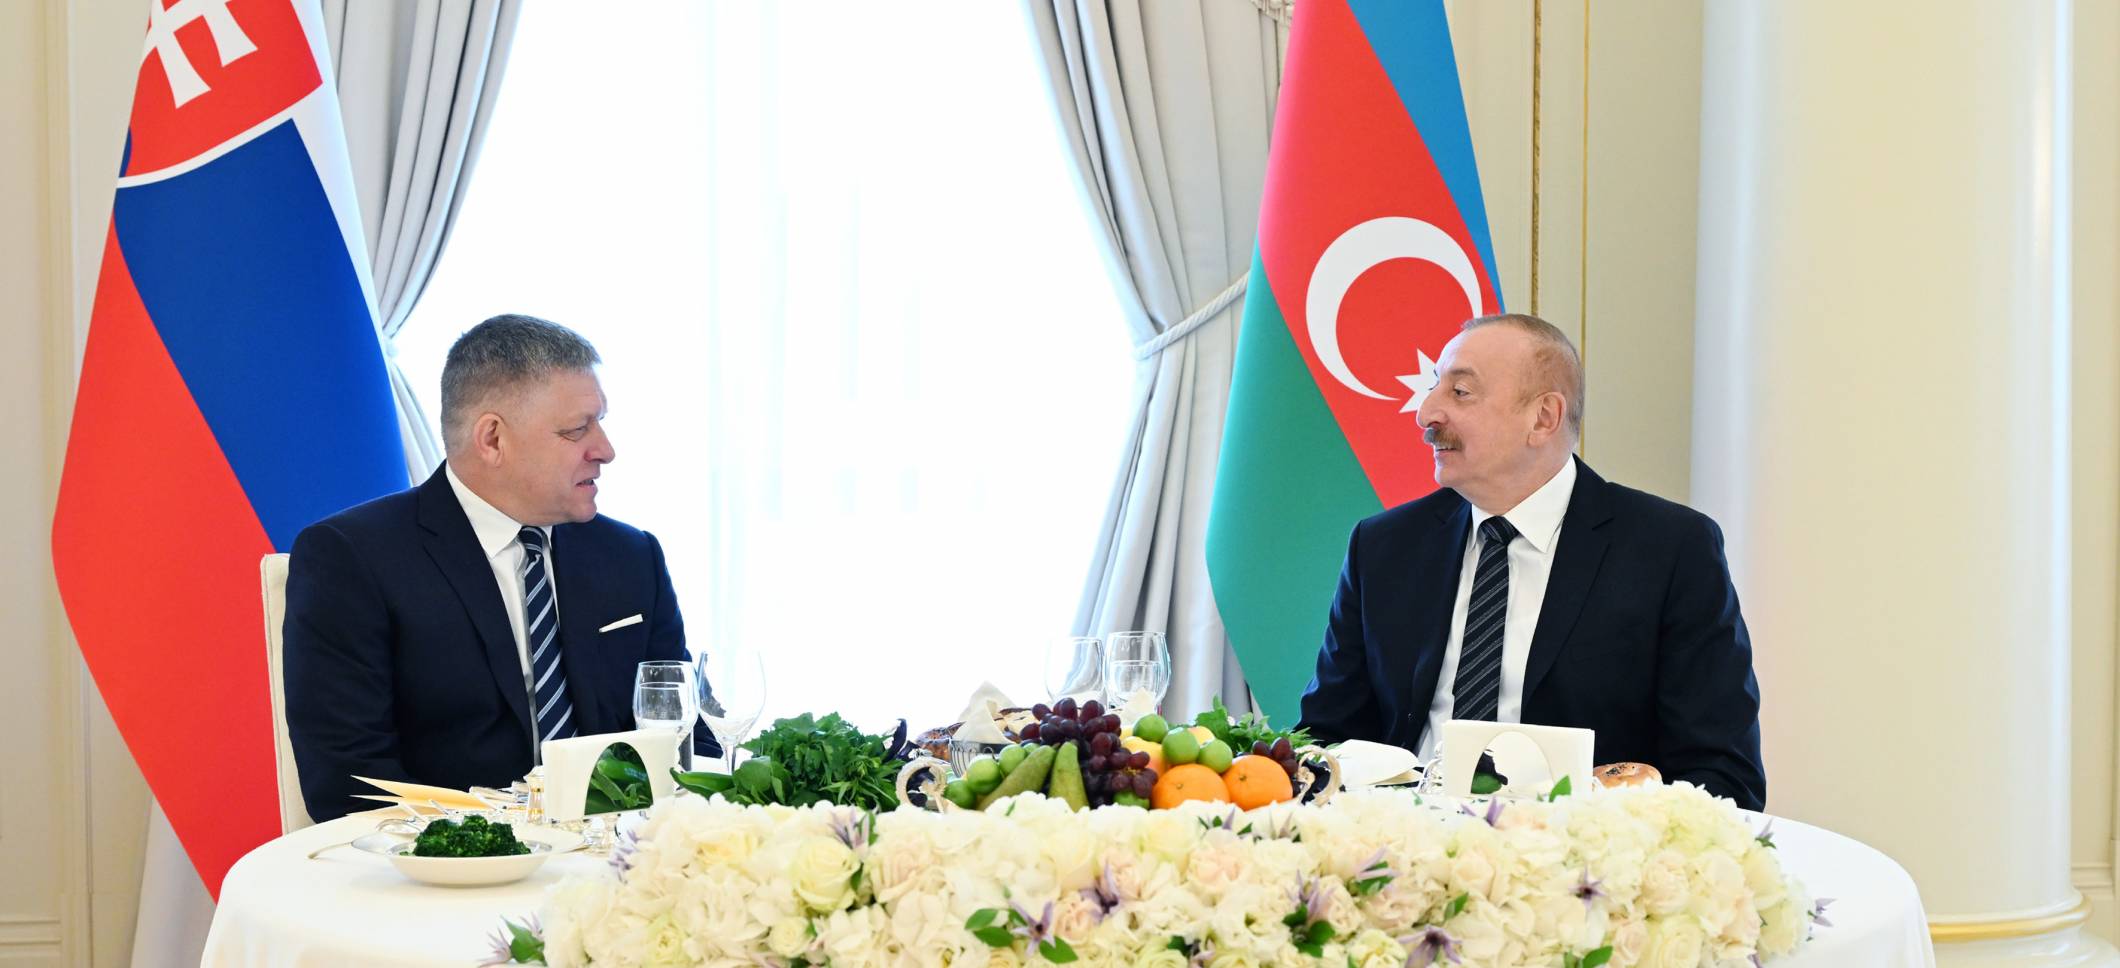 Official dinner was hosted on behalf of President of Azerbaijan in honor of Prime Minister of Slovakia